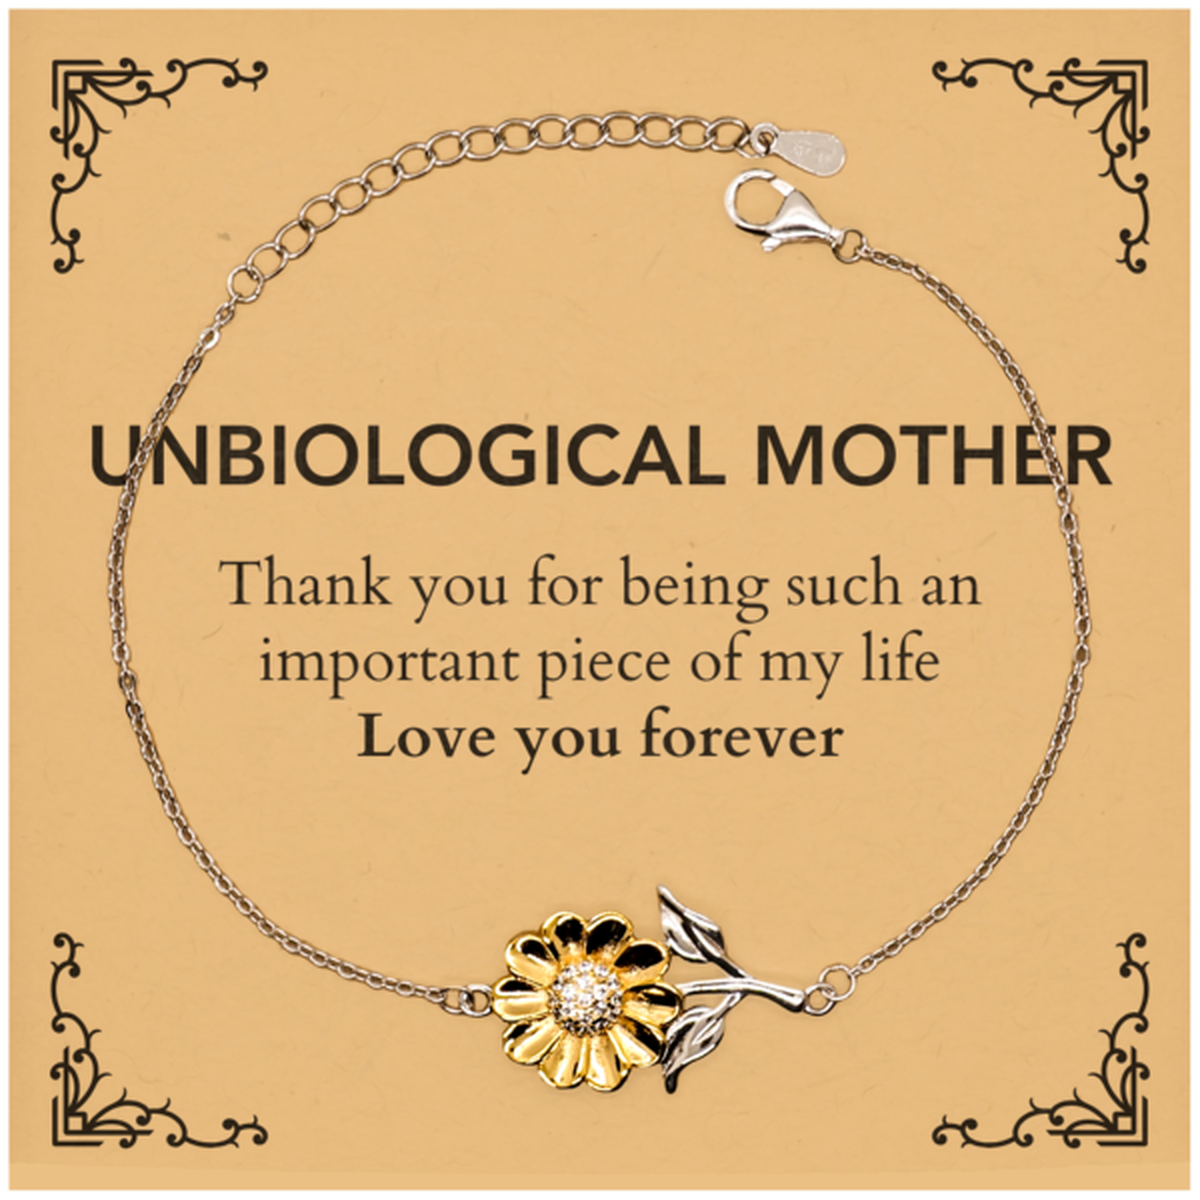 Appropriate Unbiological Mother Sunflower Bracelet Epic Birthday Gifts for Unbiological Mother Thank you for being such an important piece of my life Unbiological Mother Christmas Mothers Fathers Day